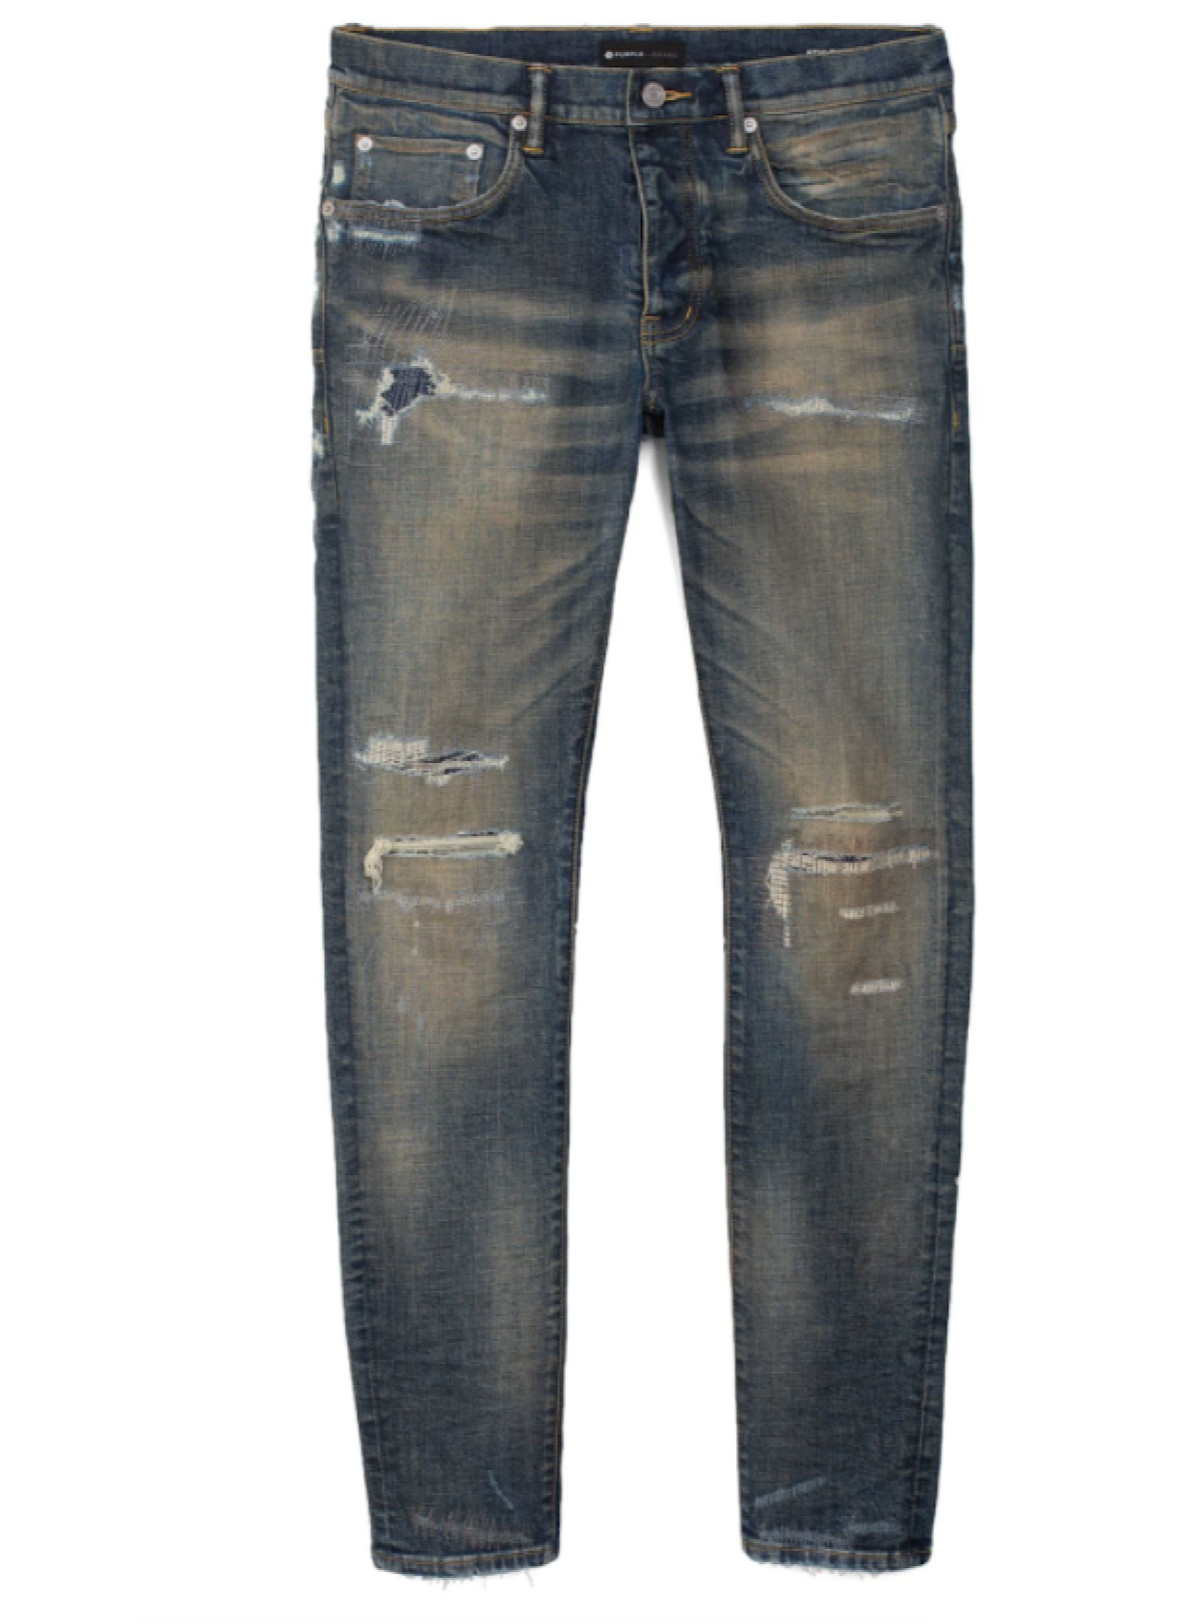 Purple-Brand Jeans - Distressed Dirty Blowout - Grey - P001